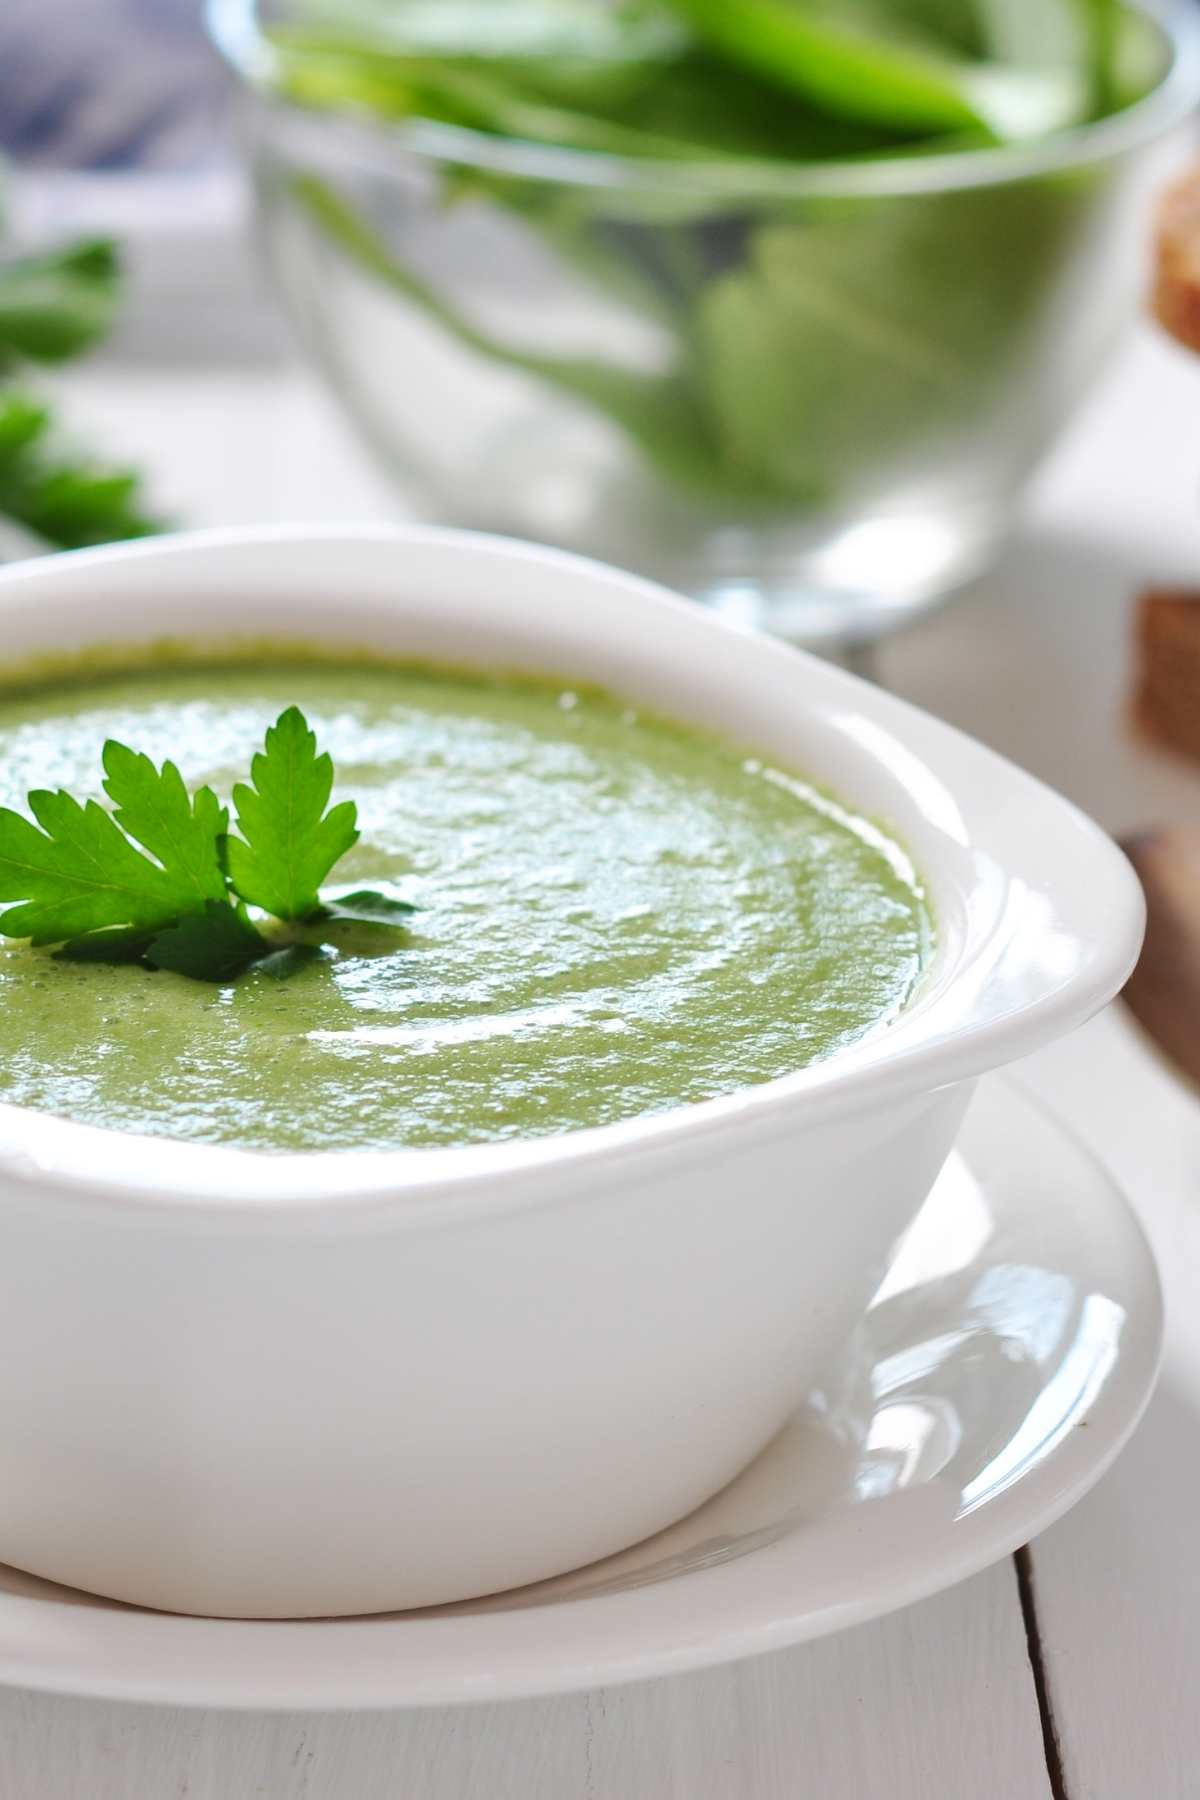 This velvety rich spinach soup is healthy, delicious, and doesn’t contain any cream! It gets its smooth texture from potatoes. If you can’t tolerate dairy or need a tasty vegan soup, give this recipe a try.